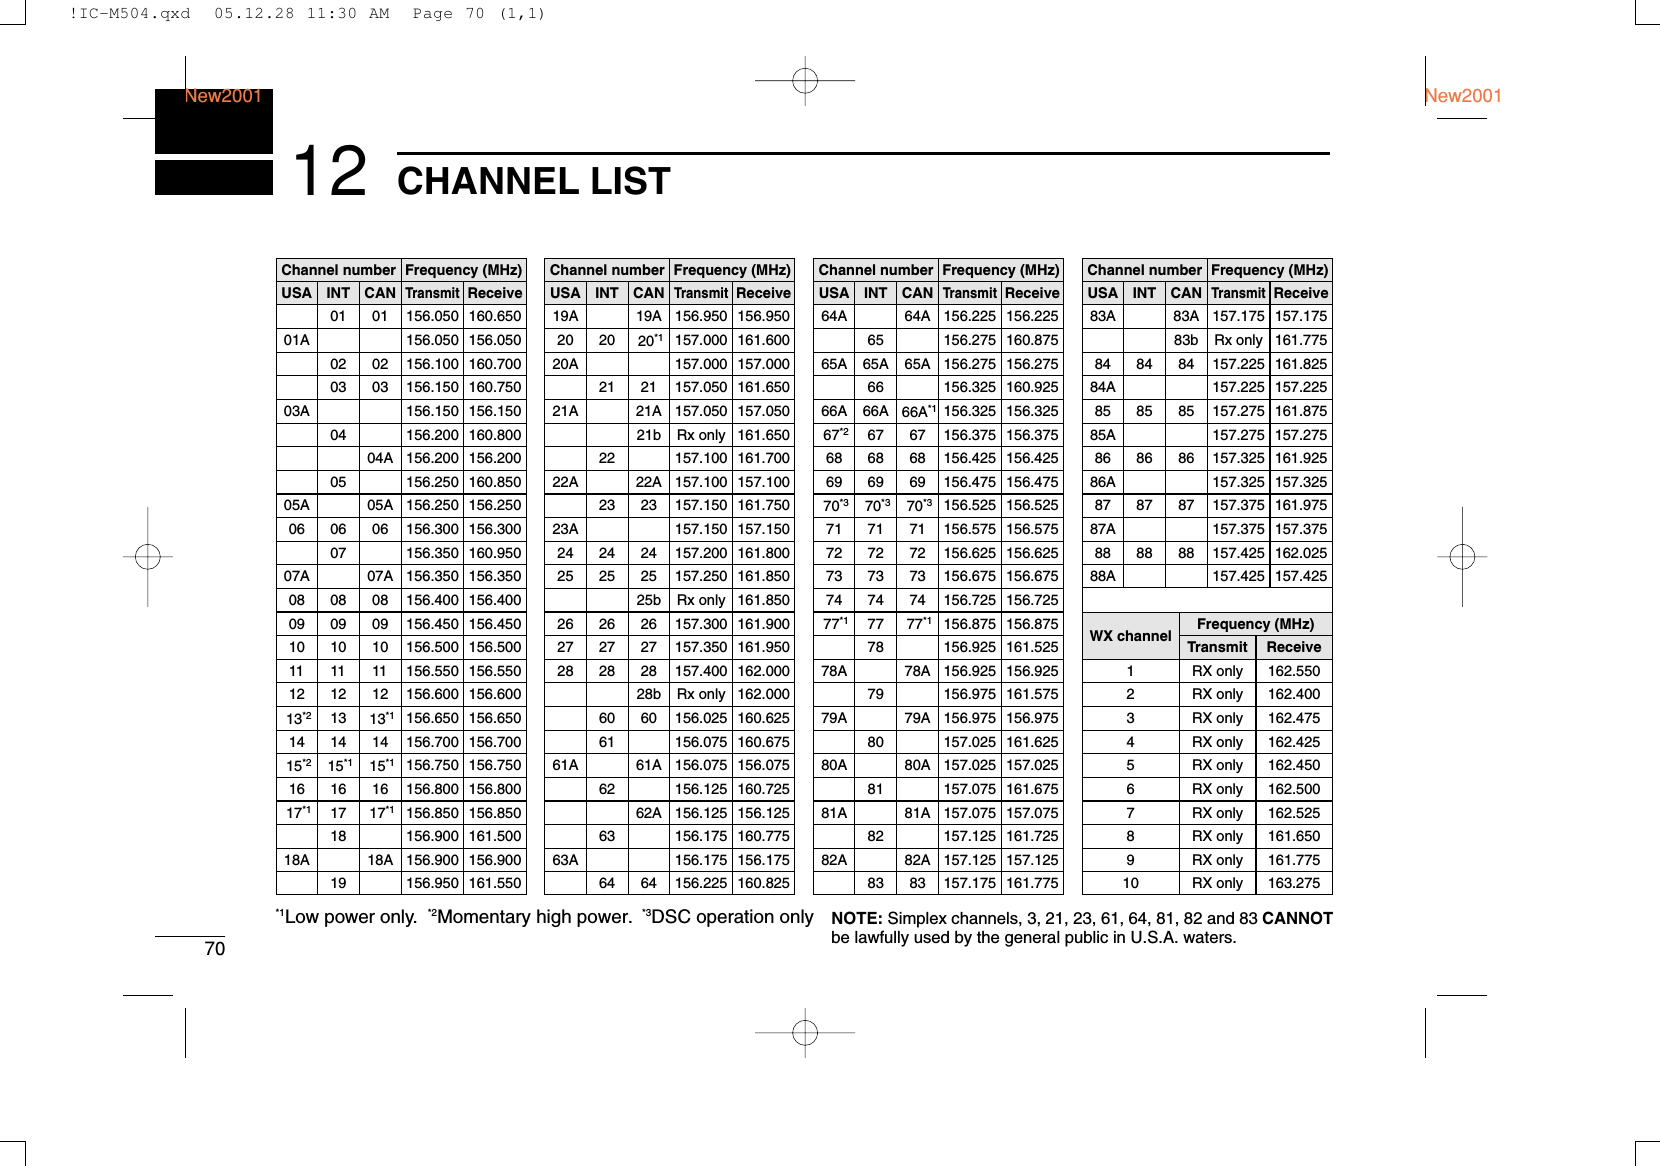 70CHANNEL LISTNew2001New200112Channel numberUSA CANTransmitReceive01 156.050 160.65001A 156.050 156.05002 156.100 160.70003 156.150 160.75003A 156.150 156.150156.200 160.80004A 156.200 156.200156.250 160.85005A 05A 156.250 156.25006 06 156.300 156.300156.350 160.95007A 07A 156.350 156.35008 08 156.400 156.40009 09 156.450 156.45010 10 156.500 156.50011 11 156.550 156.55012 12 156.600 156.60013*213*1156.650 156.65014 14 156.700 156.70015*215*1156.750 156.75016 16 156.800 156.80017*117*1156.850 156.850156.900 161.50018A 18A 156.900 156.900Frequency (MHz)INT010203040506070809101112131415*1161718Channel number Frequency (MHz)USA CANTransmitReceive19A 19A 156.950 156.95020 20*1157.000 161.60021 157.050 161.65021A 21A 157.050 157.050157.100 161.70022A 22A 157.100 157.10023 157.150 161.75023A 157.150 157.15024 24 157.200 161.80025 25 157.250 161.85026 26 157.300 161.90027 27 157.350 161.95028 28 157.400 162.00060 156.025 160.625156.075 160.67561A 61A 156.075 156.075156.125 160.72562A 156.125 156.125156.175 160.77563A 156.175 156.17564 156.225 160.825INT202122232425262728606162636420A 157.000 157.000Channel number66AFrequency (MHz)66A*1USA CANTransmitReceive64A 64A 156.225 156.22565A 65A 156.275 156.275156.325 160.92567*267 156.375 156.37568 68 156.425 156.42569 69 156.475 156.47570*370*3156.525 156.52571 71 156.575 156.57572 72 156.625 156.62573 73 156.675 156.67574 74 156.725 156.72577*177*1156.875 156.875156.925 161.52578A 78A 156.925 156.925156.975 161.57579A 79A 156.975 156.975157.025 161.62580A 80A 157.025 157.025157.075 161.67581A 81A 157.075 157.075157.125 161.72582A 82A 157.125 157.125INT65A6667686970*371727374777879808182156.325 156.32566AChannel number84AFrequency (MHz)USA CANTransmitReceive83A 83A 157.175 157.17584 84 157.225 161.82585 85 157.275 161.87585A 157.275 157.27586 86 157.325 161.92586A 157.325 157.32587 87 157.375 161.97587A 157.375 157.37588 88 157.425 162.02588A 157.425 157.425INT8485868788157.225 157.225WX channel4Frequency (MHz)Transmit Receive1 RX only 162.5502 RX only 162.4003 RX only 162.4755 RX only 162.4506 RX only 162.5007 RX only 162.5258 RX only 161.6509 RX only 161.77510 RX only 163.275RX only 162.425*1Low power only.*3DSC operation only 156.950 161.5501921b Rx only 161.65025b Rx only 161.850156.275 160.8756528b Rx only 162.00083 157.175 161.7758383b Rx only 161.775*2Momentary high power.NOTE: Simplex channels, 3, 21, 23, 61, 64, 81, 82 and 83 CANNOTbe lawfully used by the general public in U.S.A. waters.!IC-M504.qxd  05.12.28 11:30 AM  Page 70 (1,1)